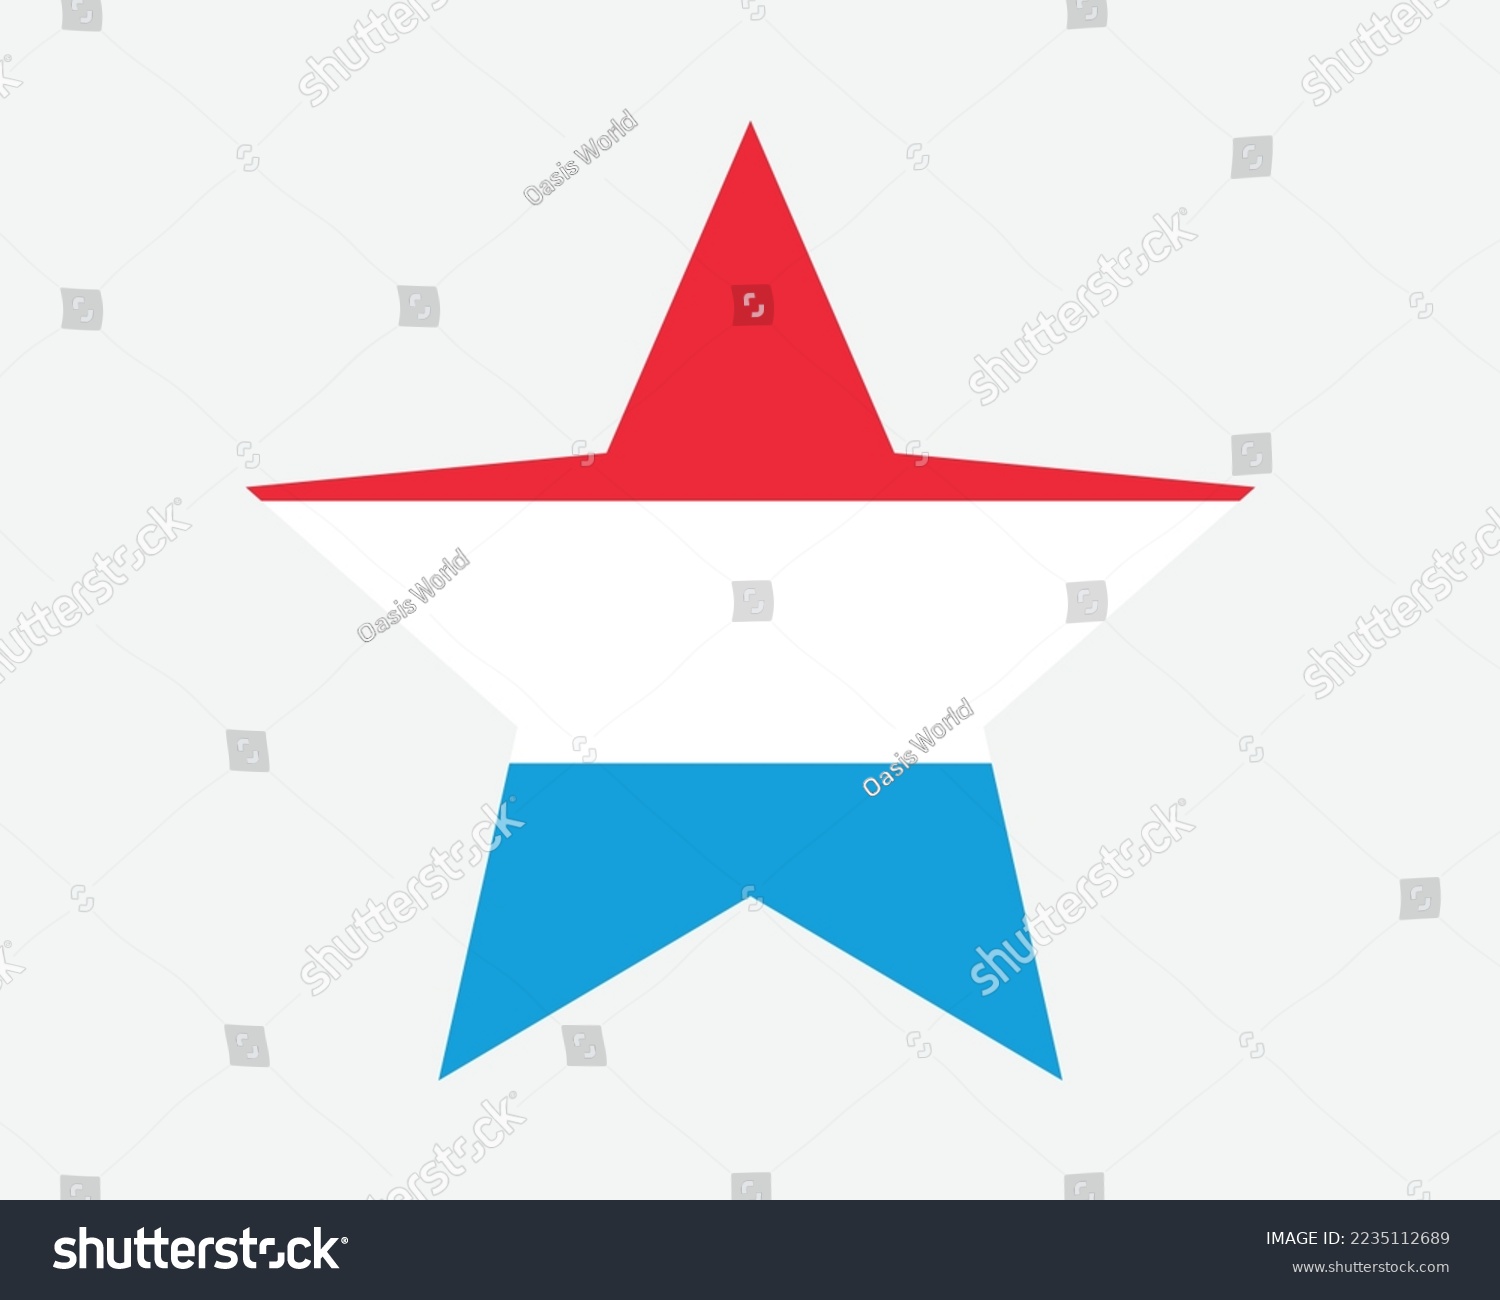 SVG of Luxembourg Star Flag. Luxembourger Star Shape Flag. Luxembourgish Country National Banner Icon Symbol Vector Flat Artwork Graphic Illustration svg